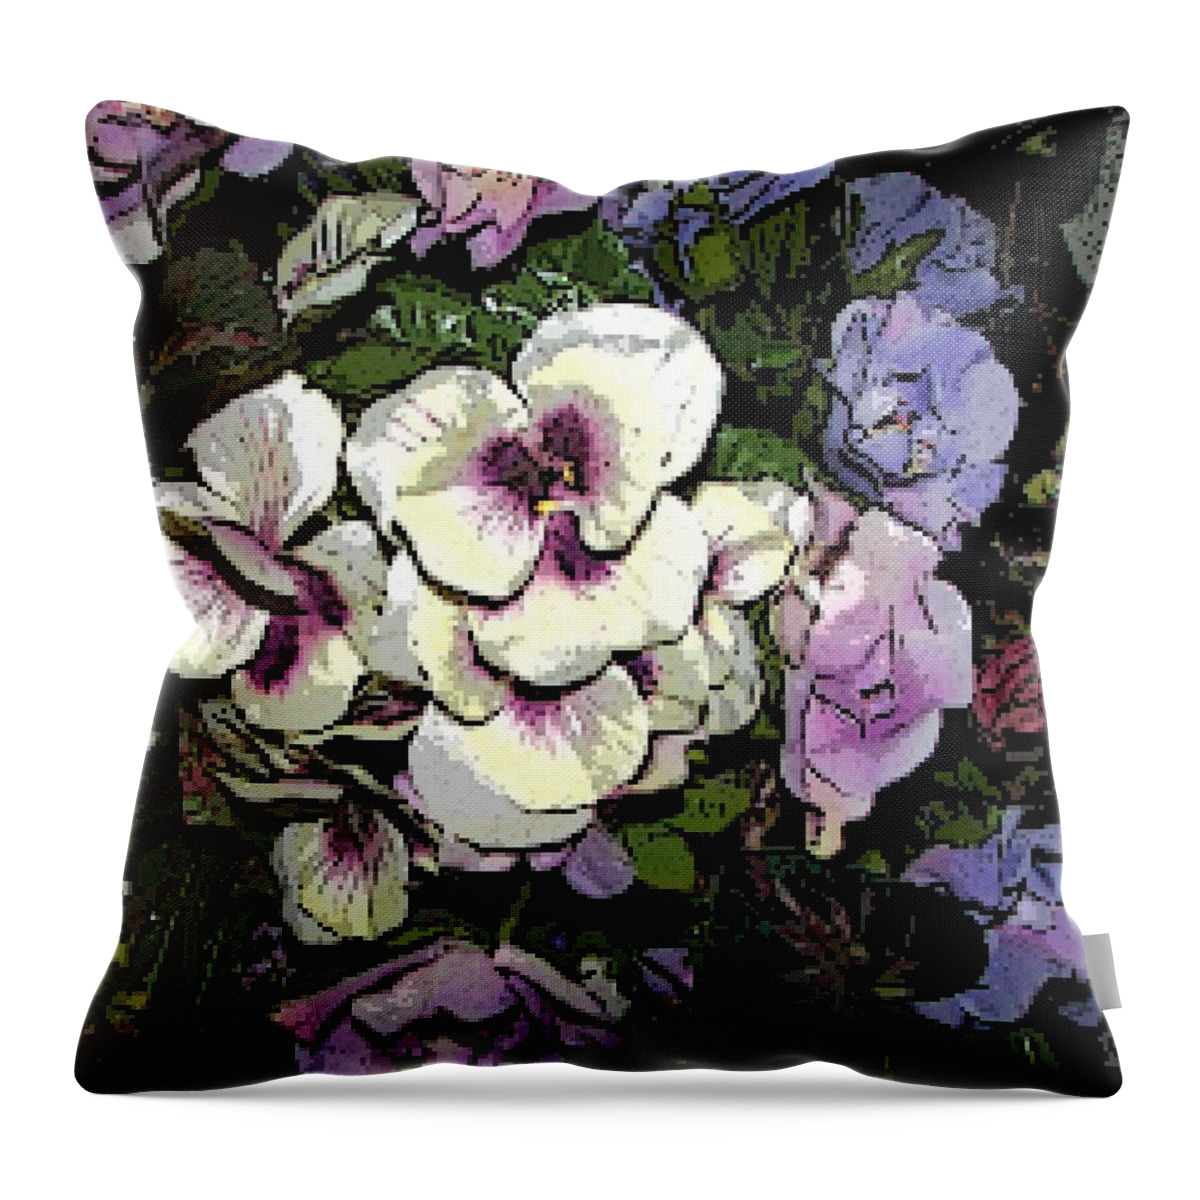 Floral Throw Pillow featuring the photograph Surrounding Pansies by Pamela Hyde Wilson